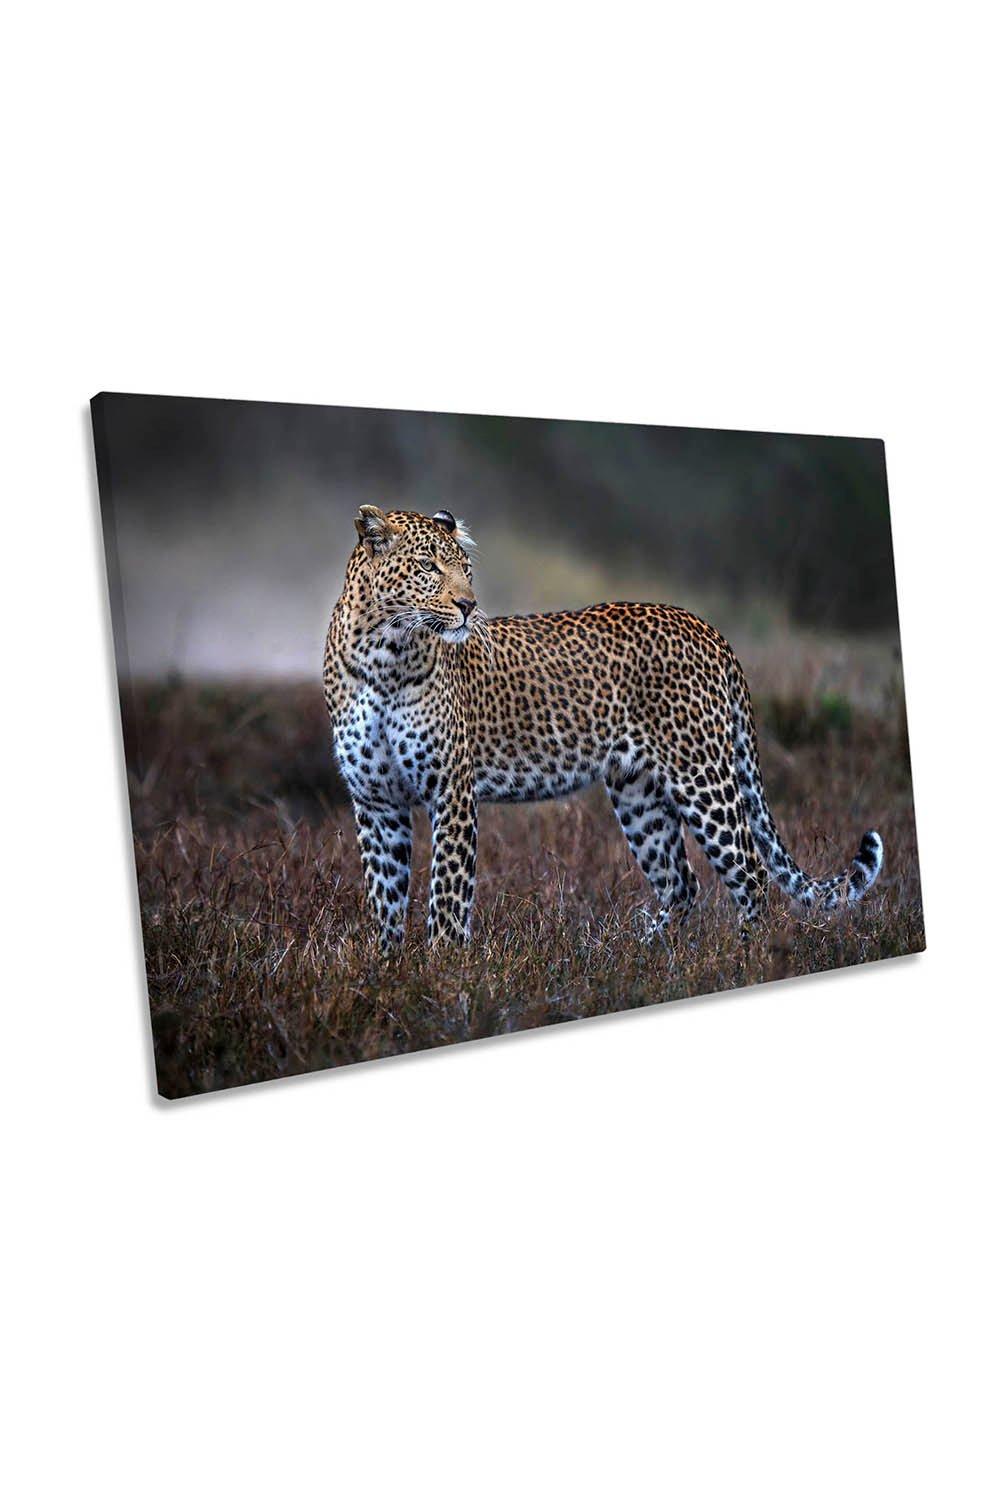 Leopard on the Prowl Wildlife Canvas Wall Art Picture Print